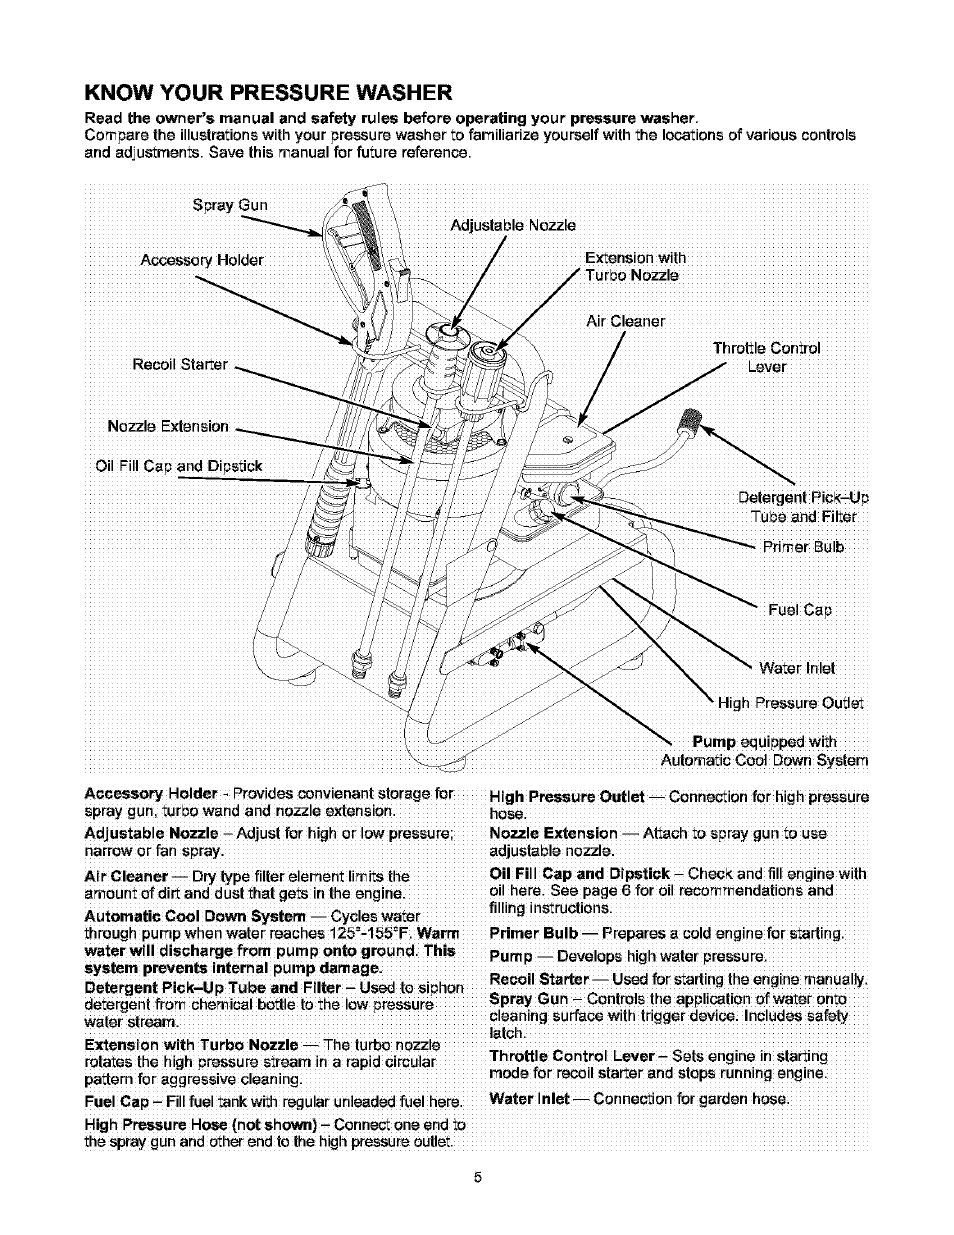 Know your pressure washer | Craftsman 580.752000 User Manual | Page 5 / 40